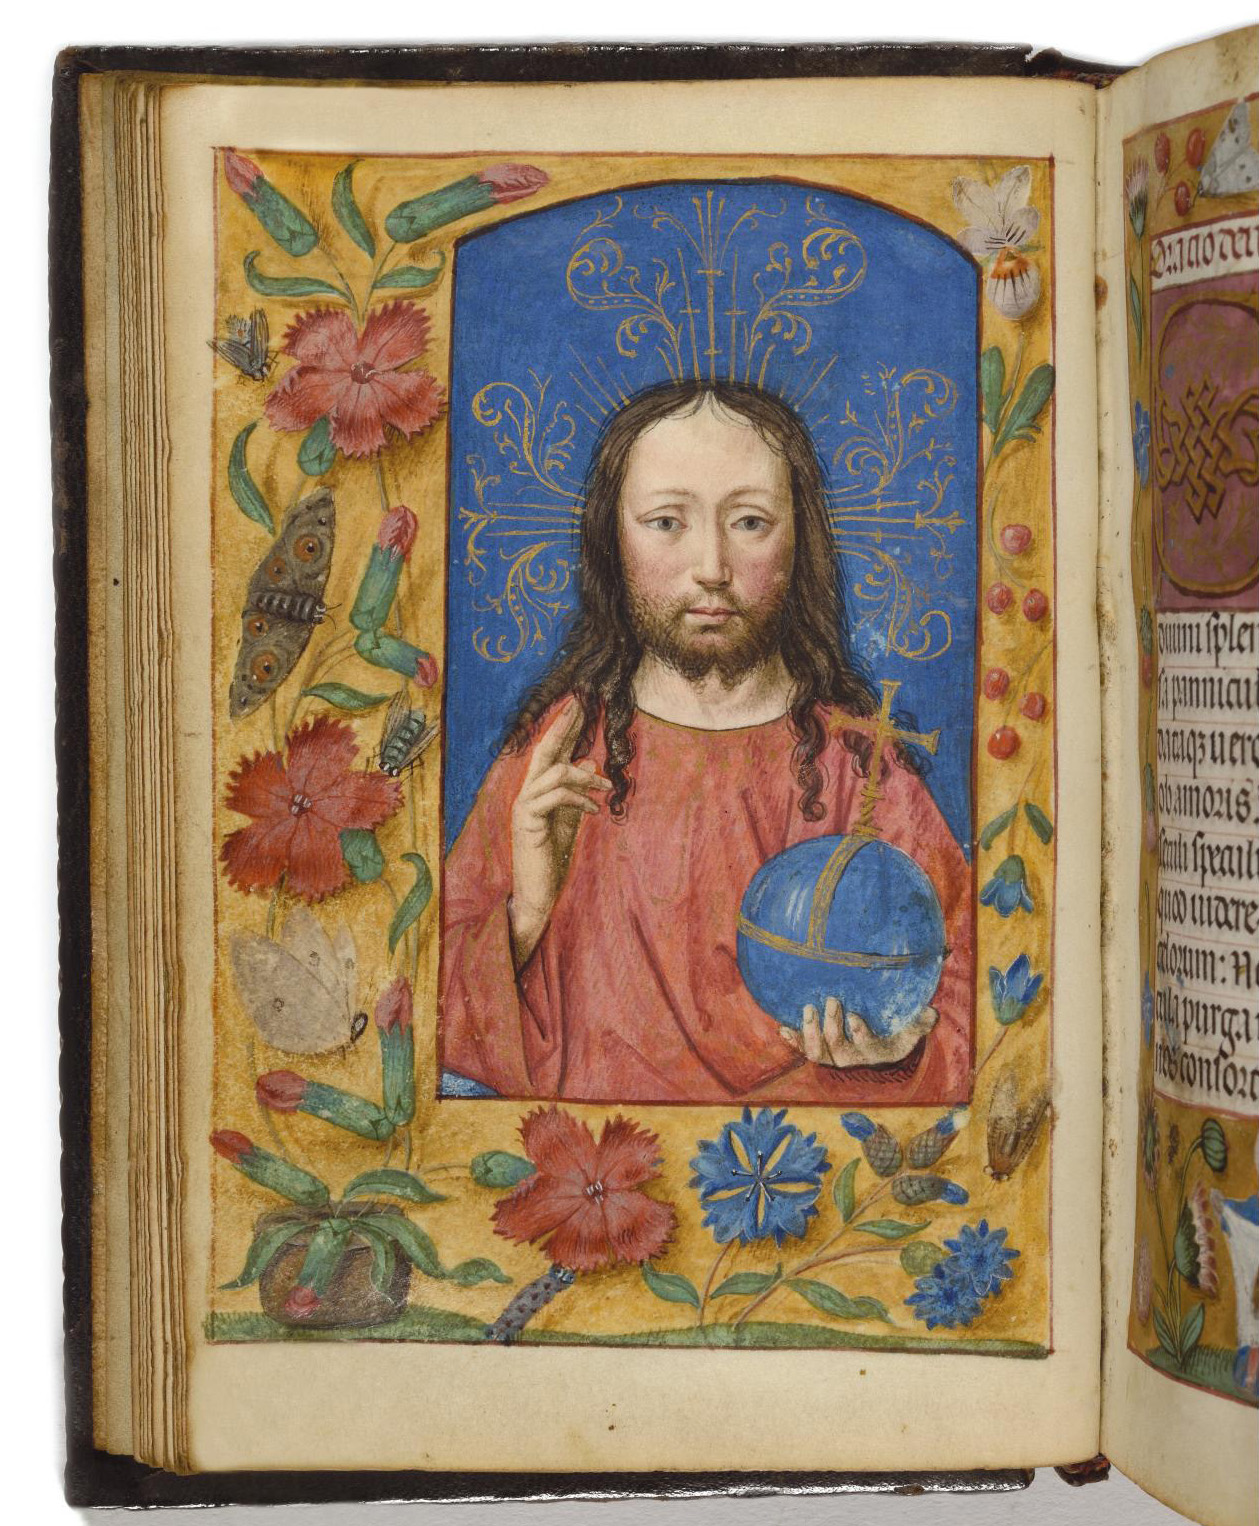 €117,500First quarter of 16th century, Simon Bening’s Ghent-Bruges studio, Book of Hours in Latin for the Utrecht rite, illuminated manusc